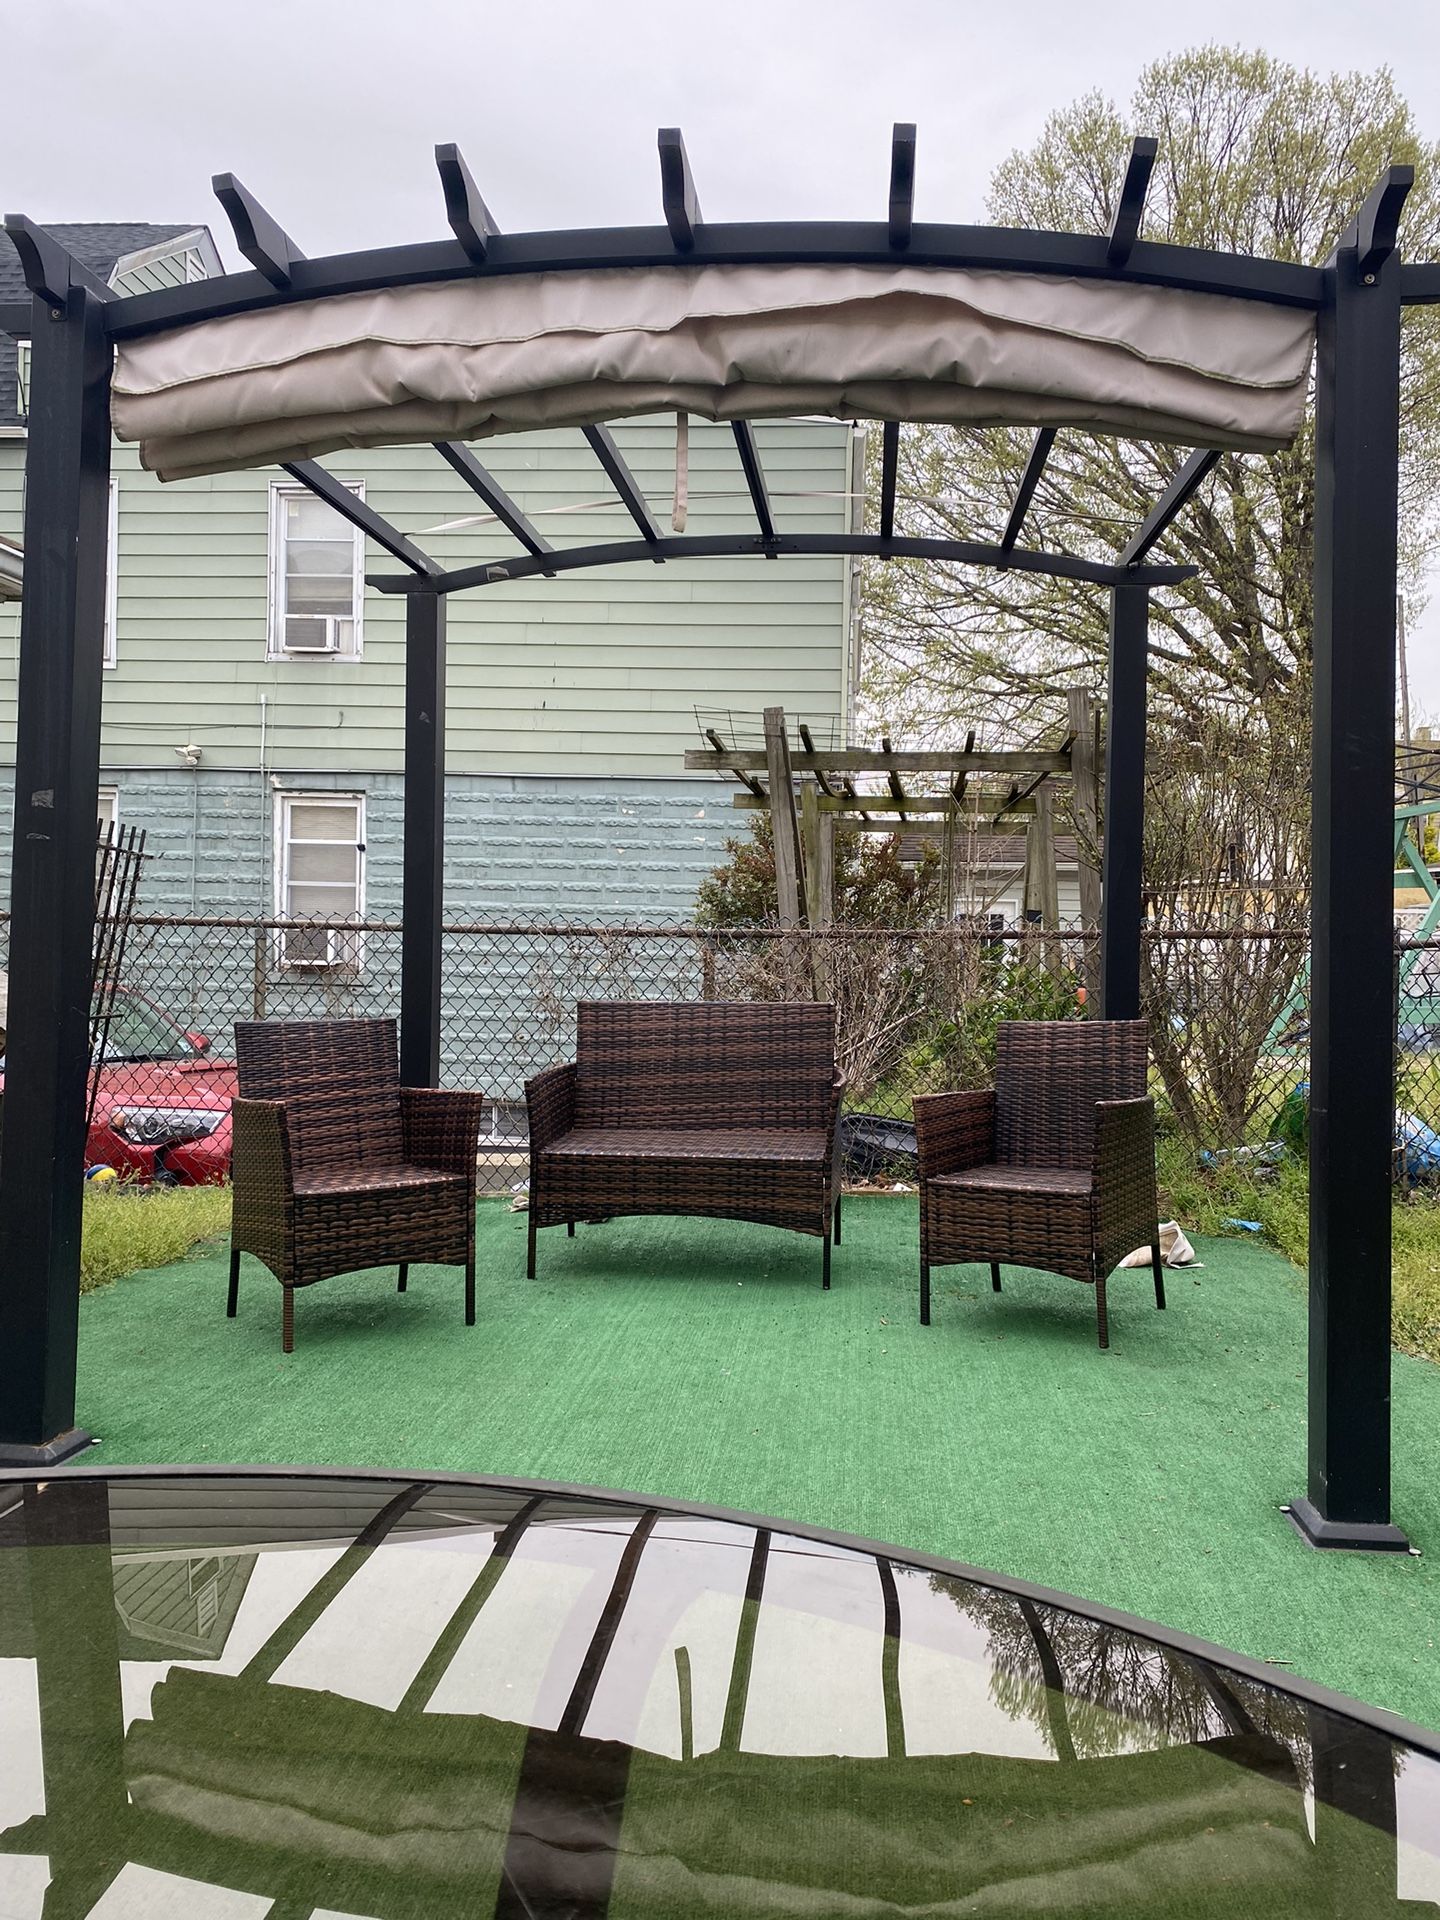 Gazebo and four chairs